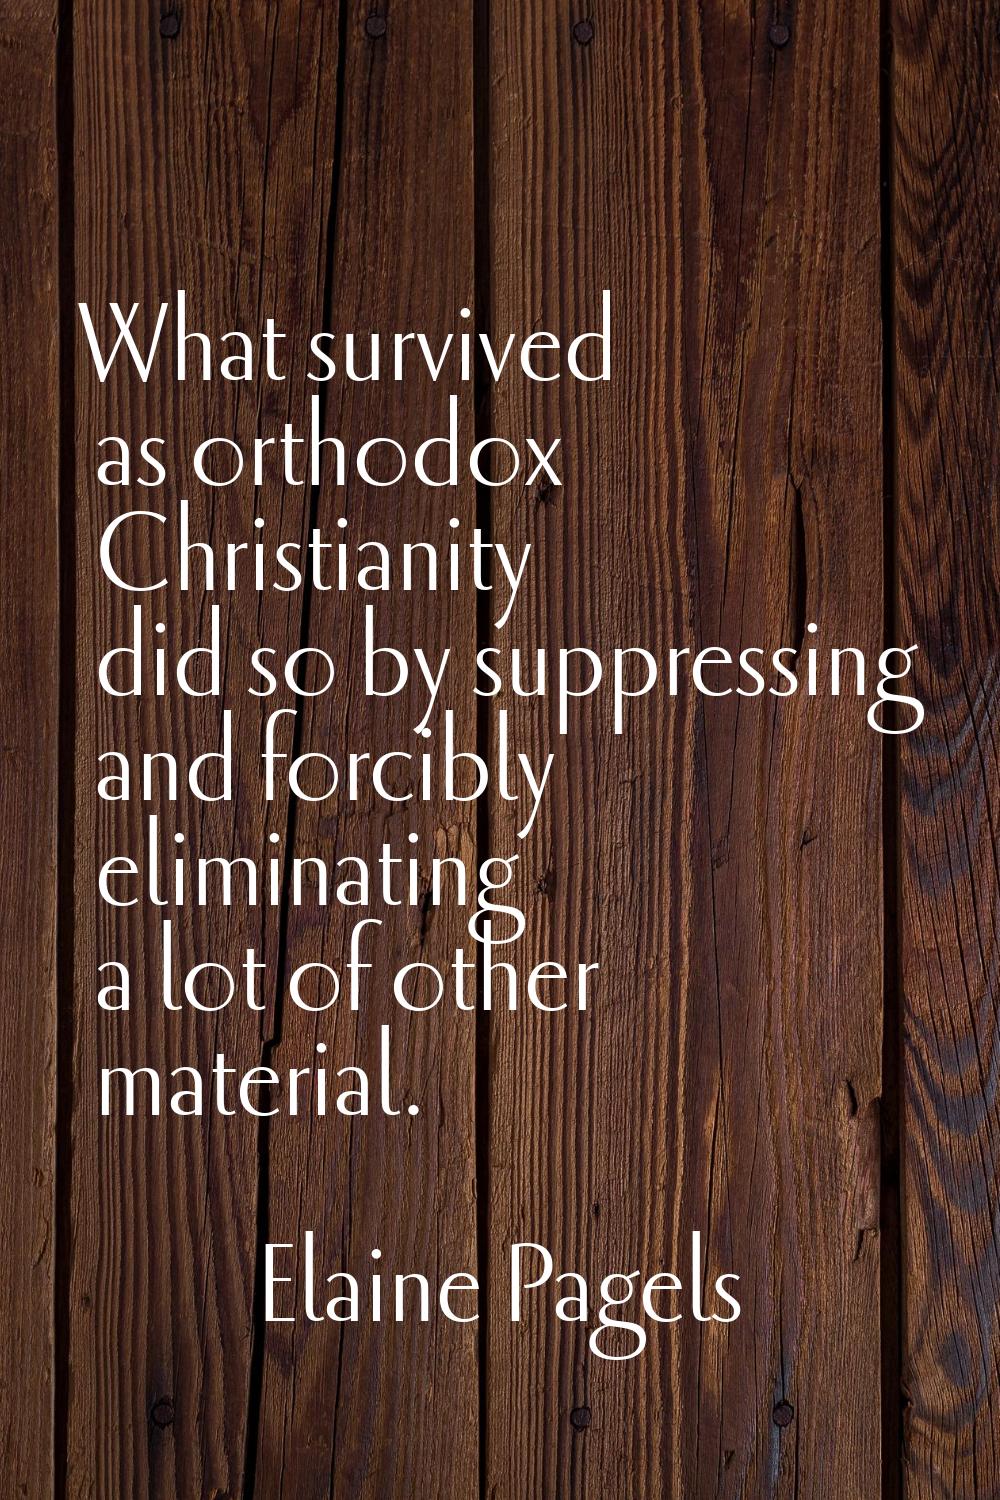 What survived as orthodox Christianity did so by suppressing and forcibly eliminating a lot of othe